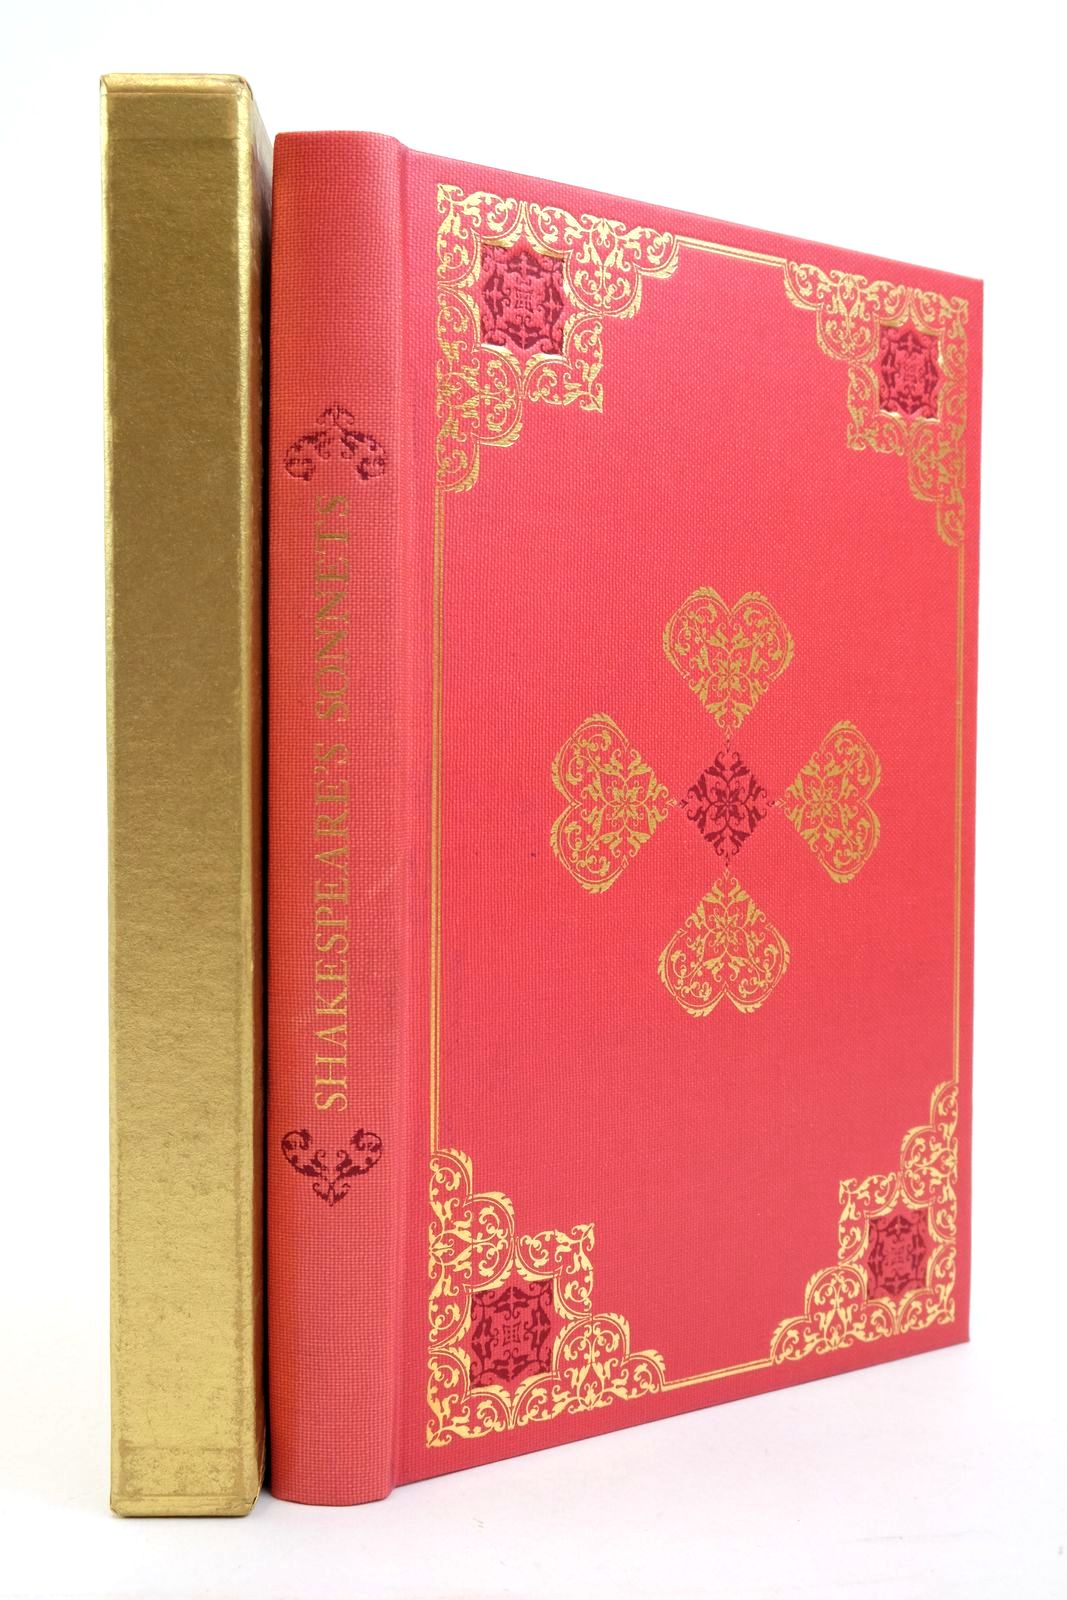 Photo of SHAKESPEARE'S SONNETS written by Shakespeare, William published by Folio Society (STOCK CODE: 2138390)  for sale by Stella & Rose's Books